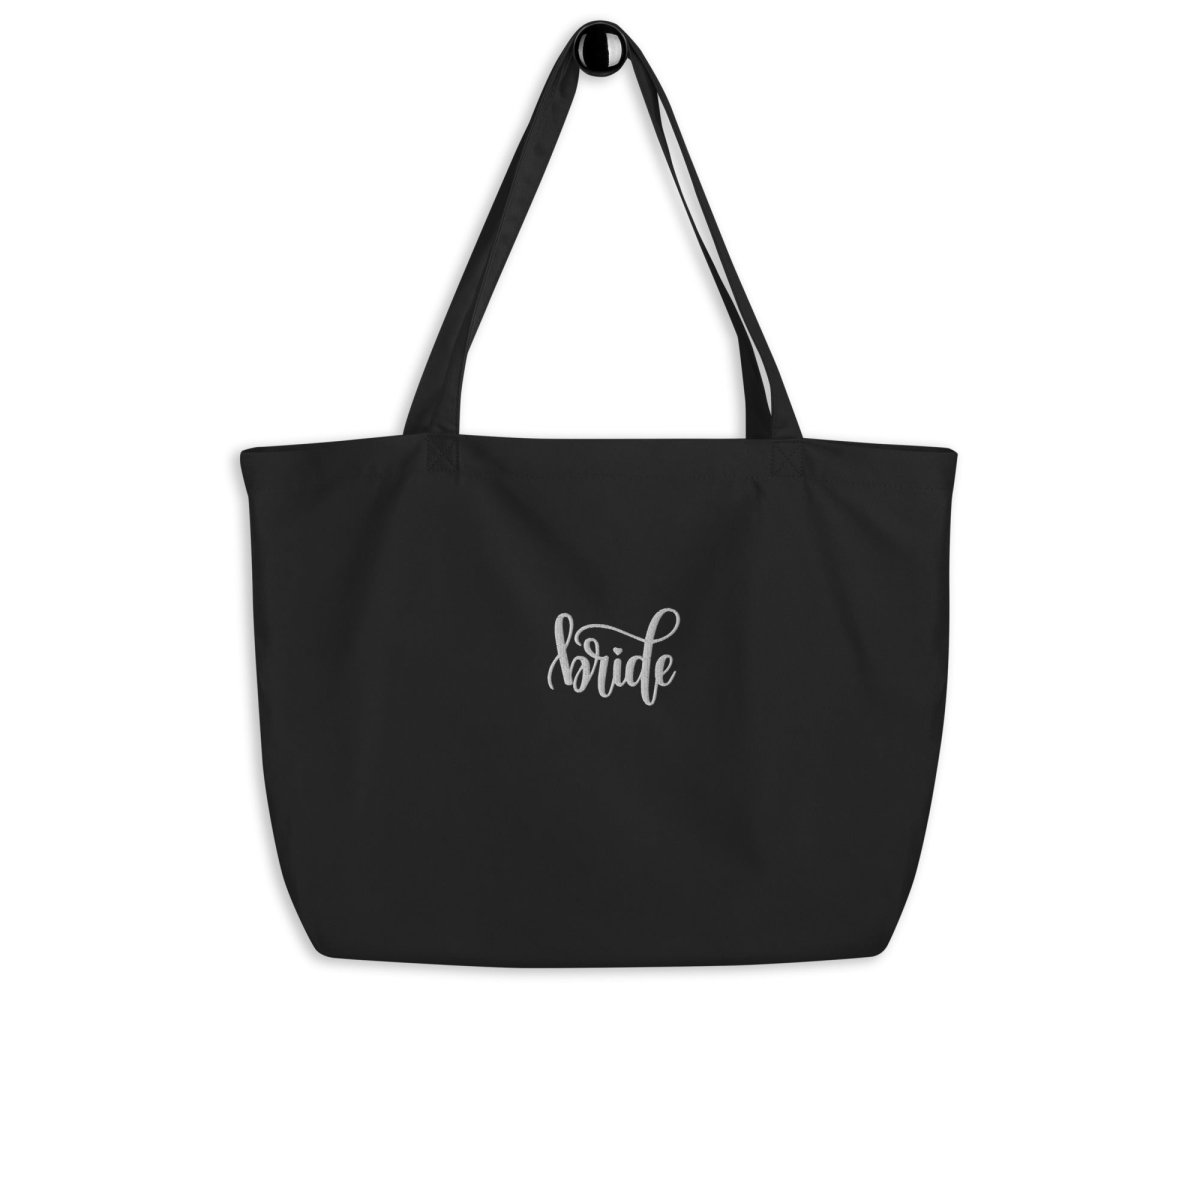 Sefira Bride Large Organic Tote Bag | Sefira Beach Collection Accessories - Sefira Collections